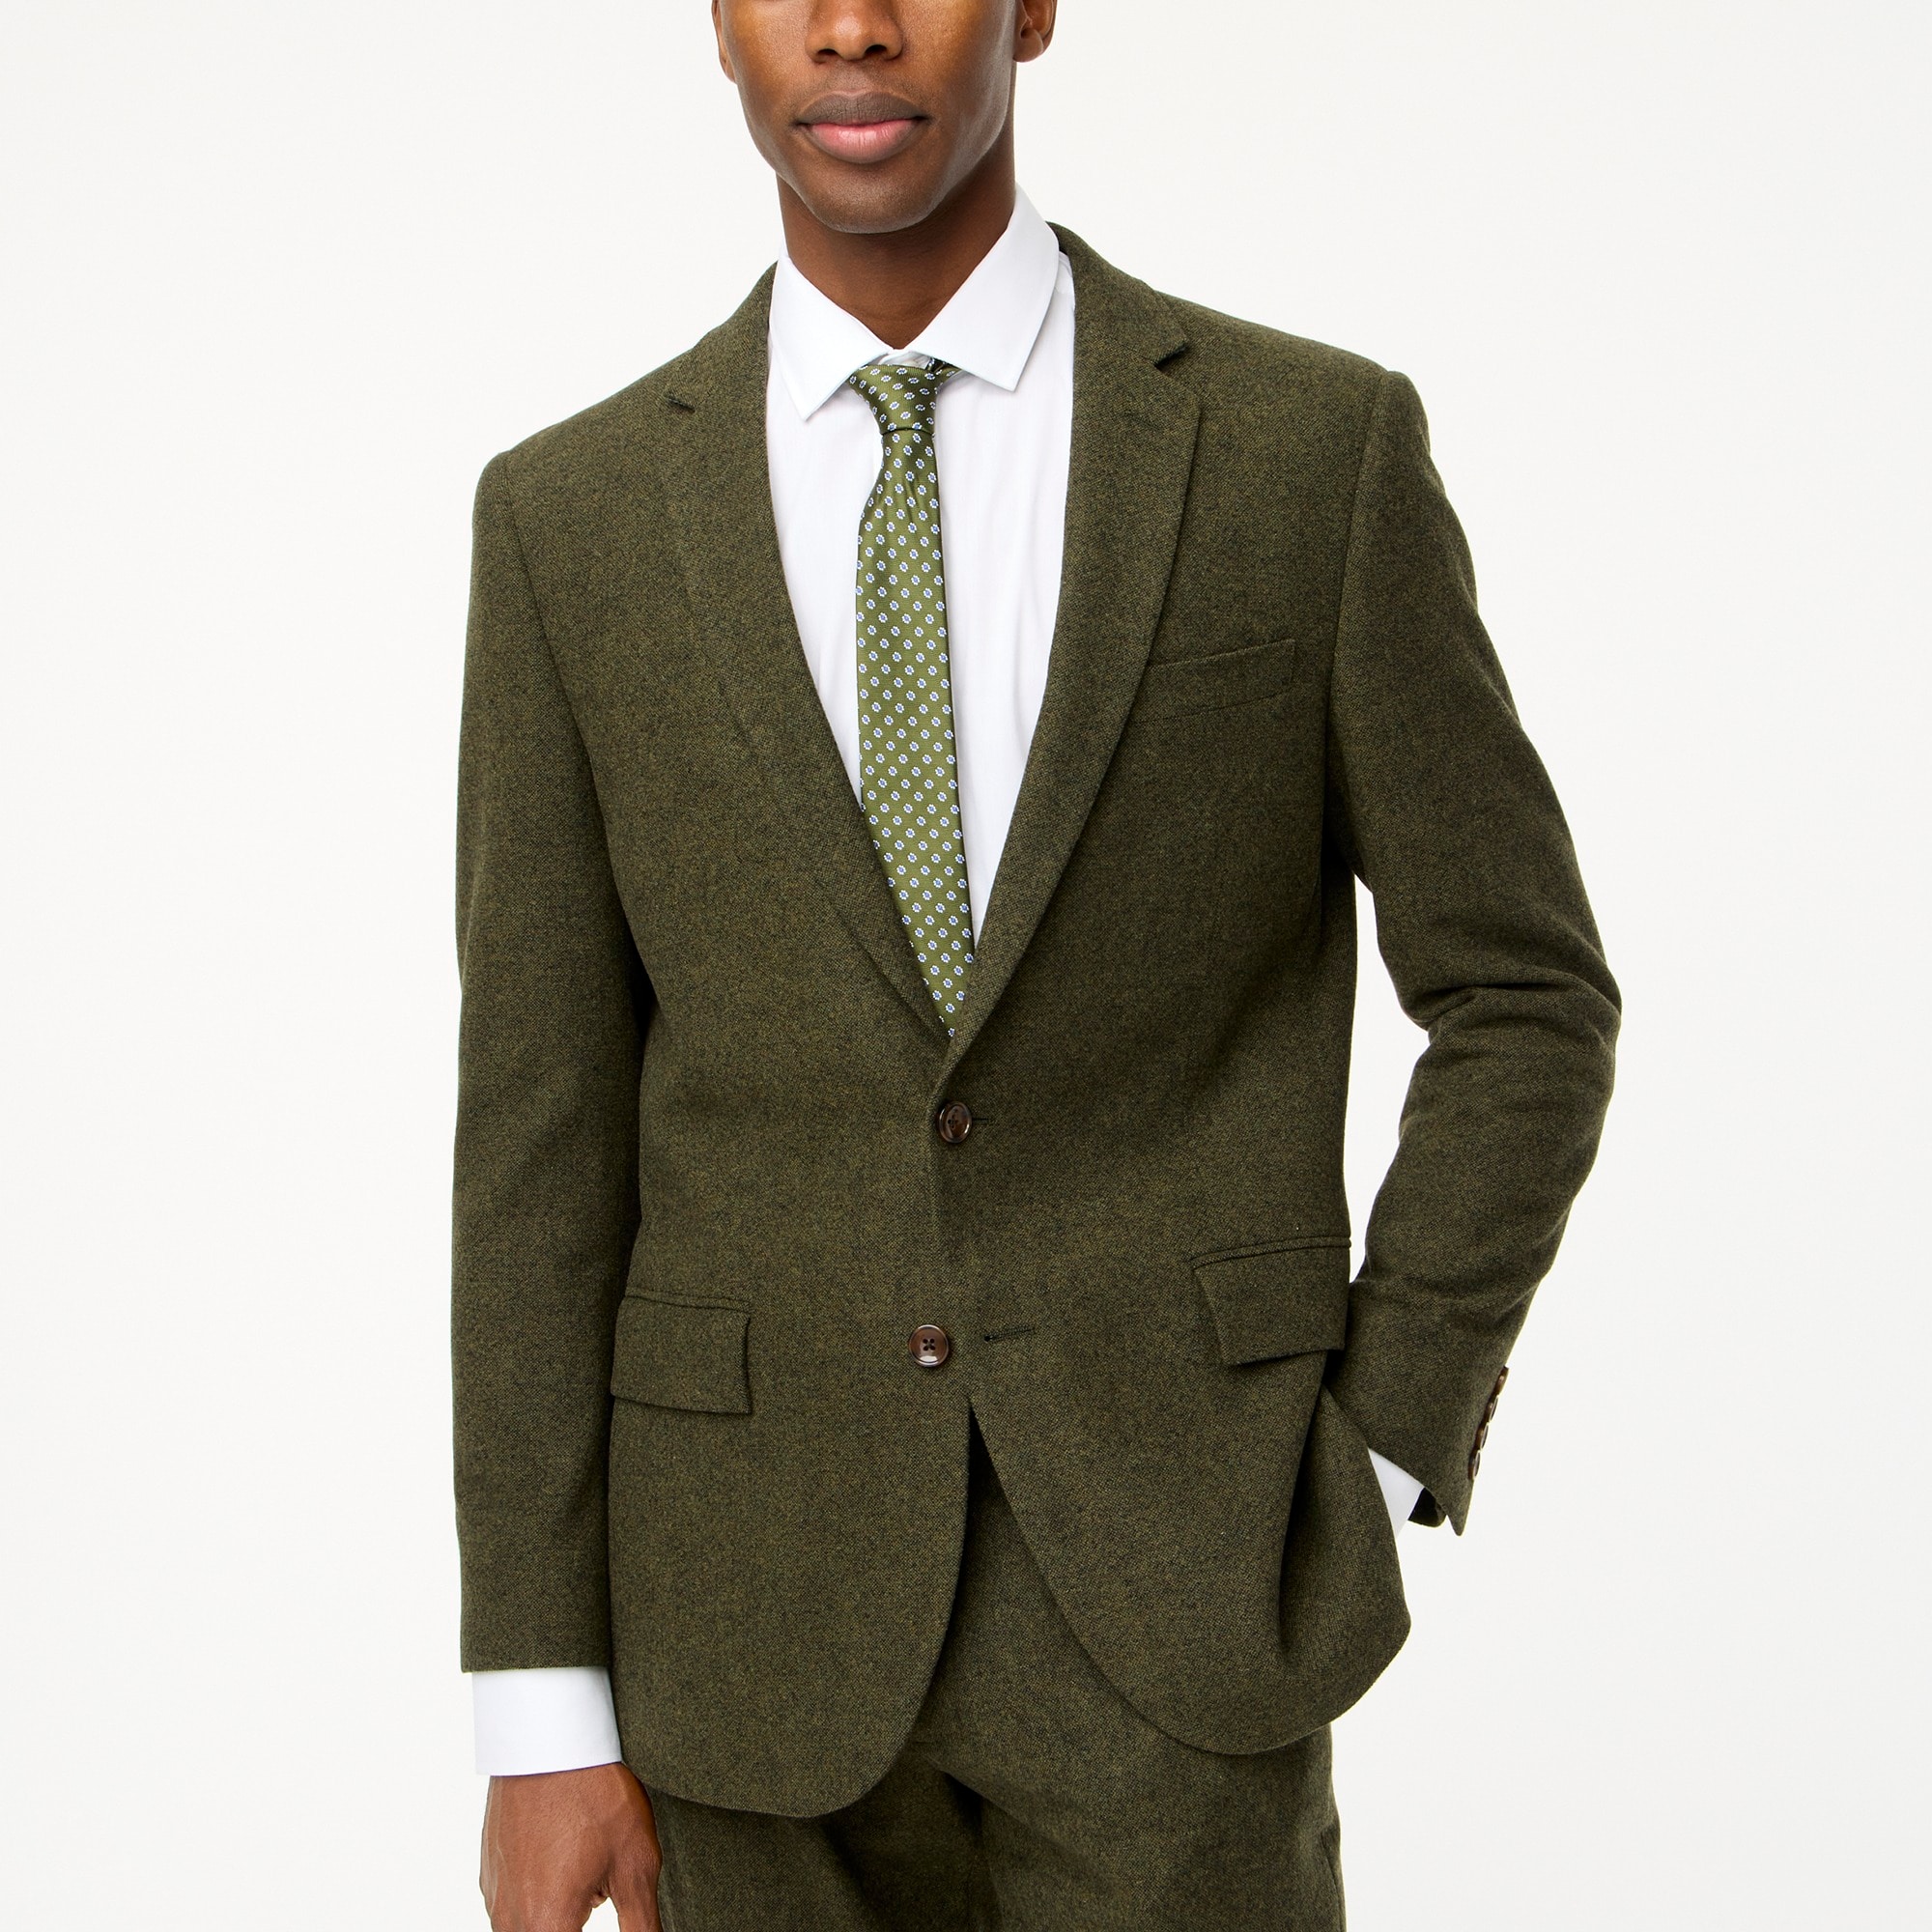  Slim-fit Thompson suit jacket in donegal wool blend